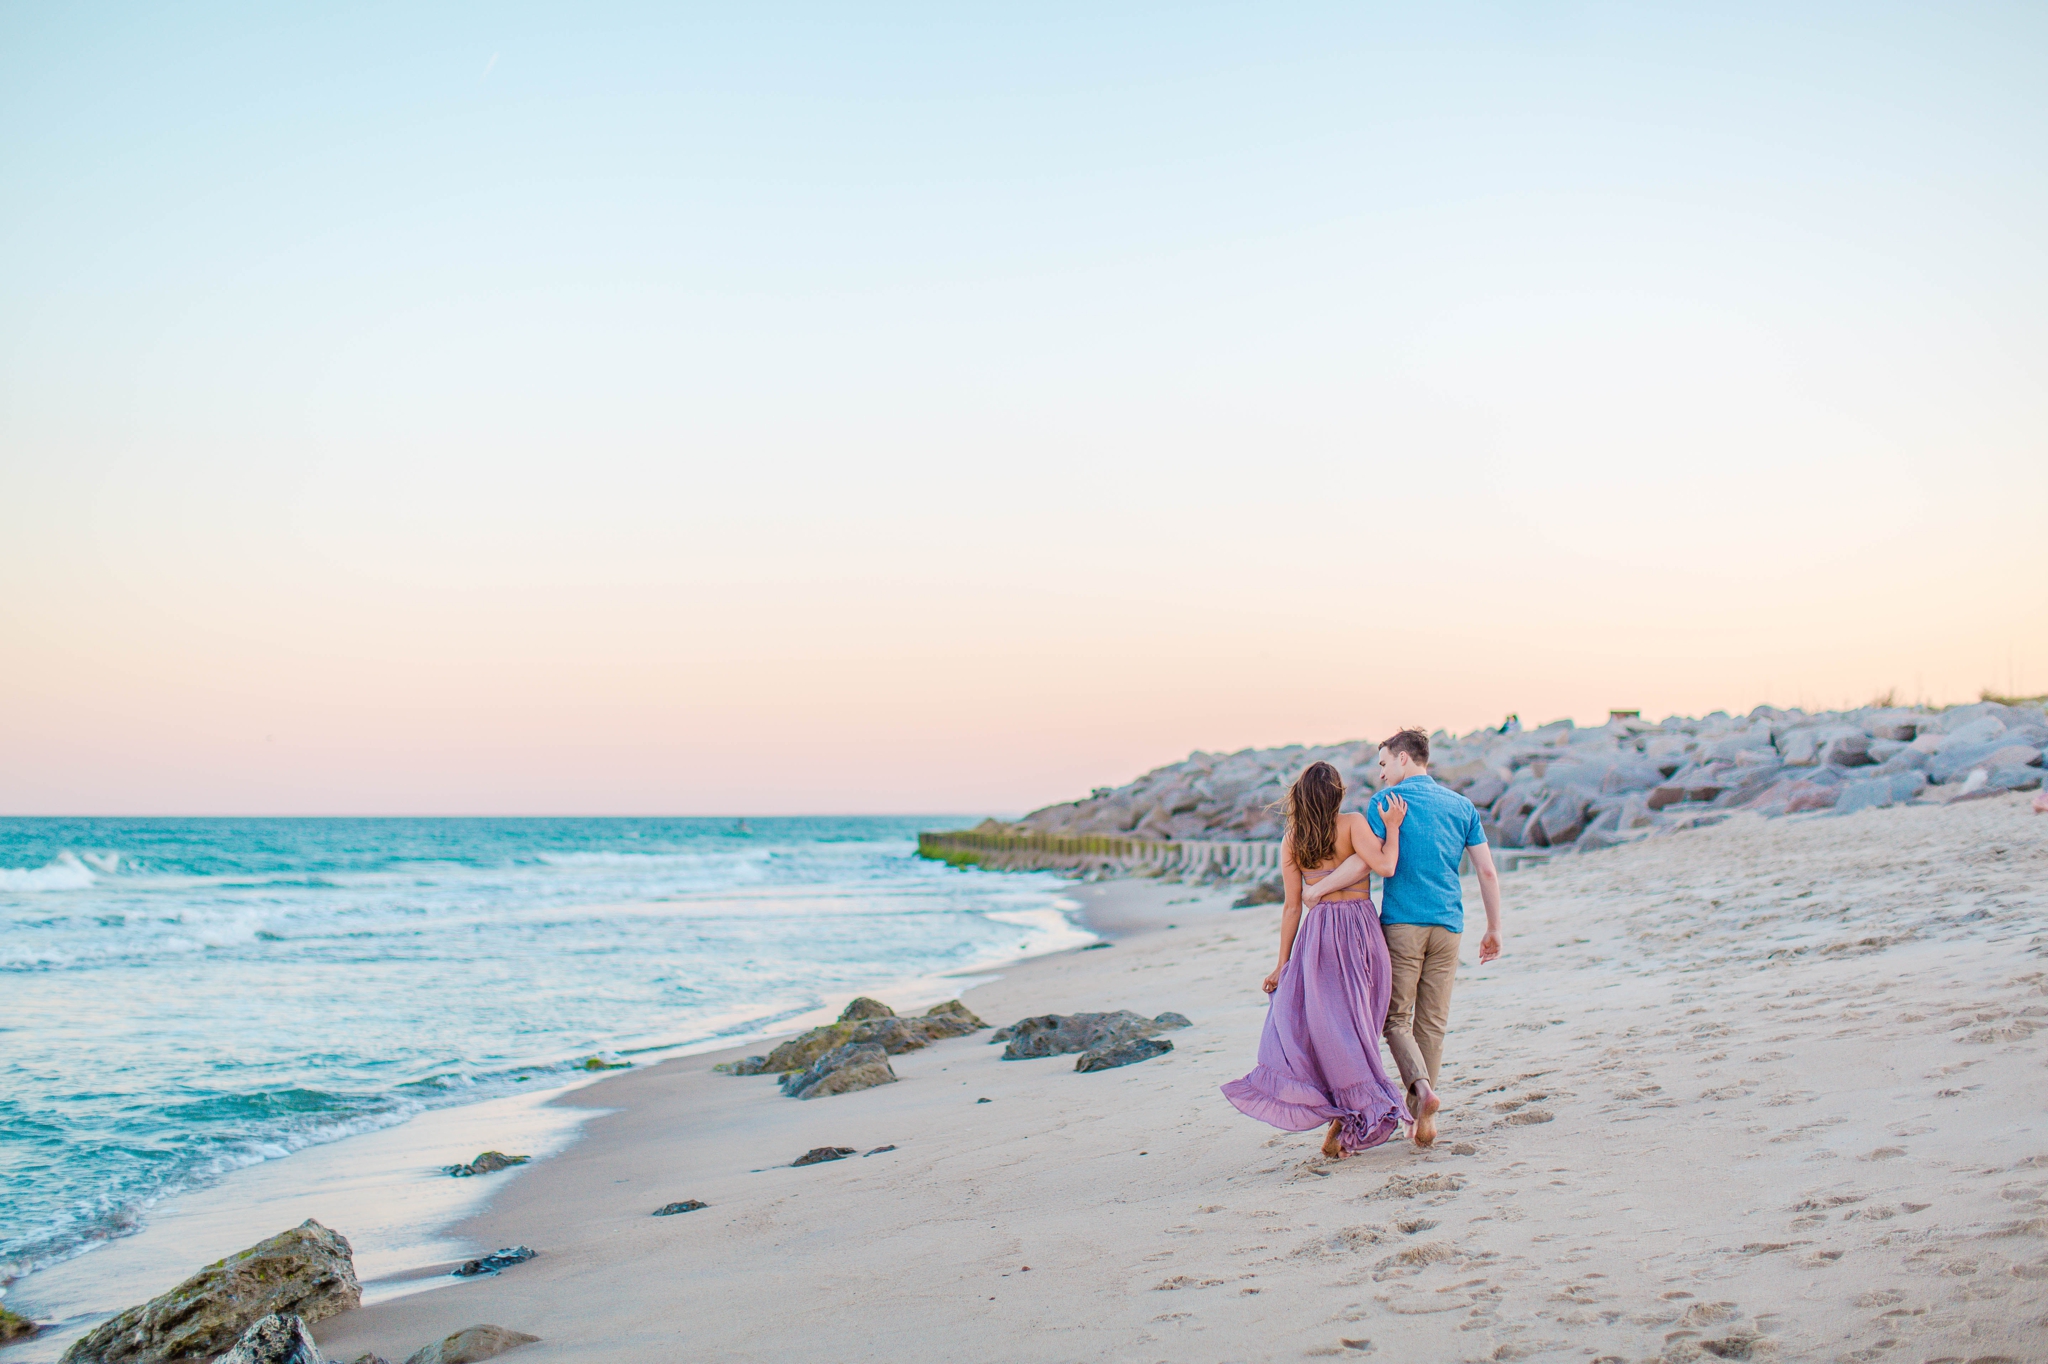  couple on the beach walking and laughing - - Woman is in a flowy pastel maxi dress - candid and unposed golden light session - beach engagement photographer in honolulu, oahu, hawaii - johanna dye photography 